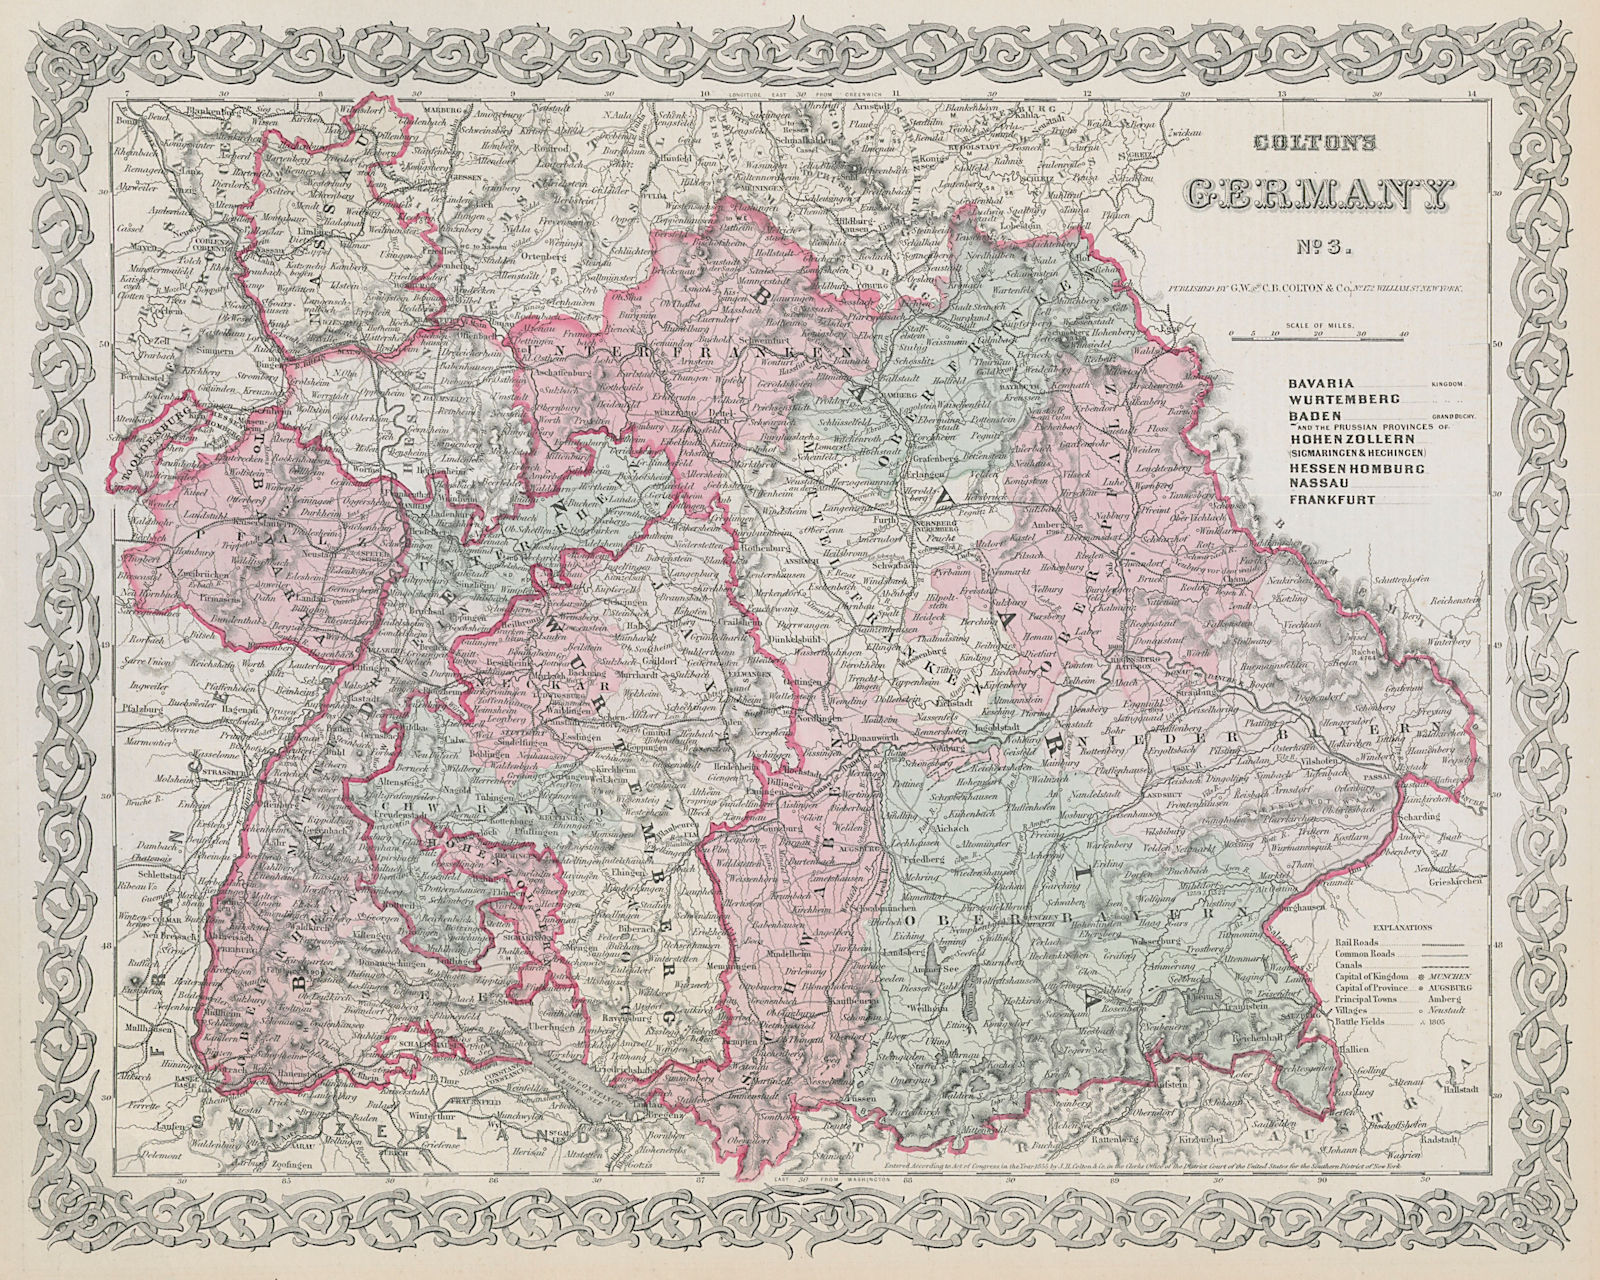 Associate Product Colton's Germany No 3. Southern. Bavaria & Baden-Wurttemberg 1869 old map